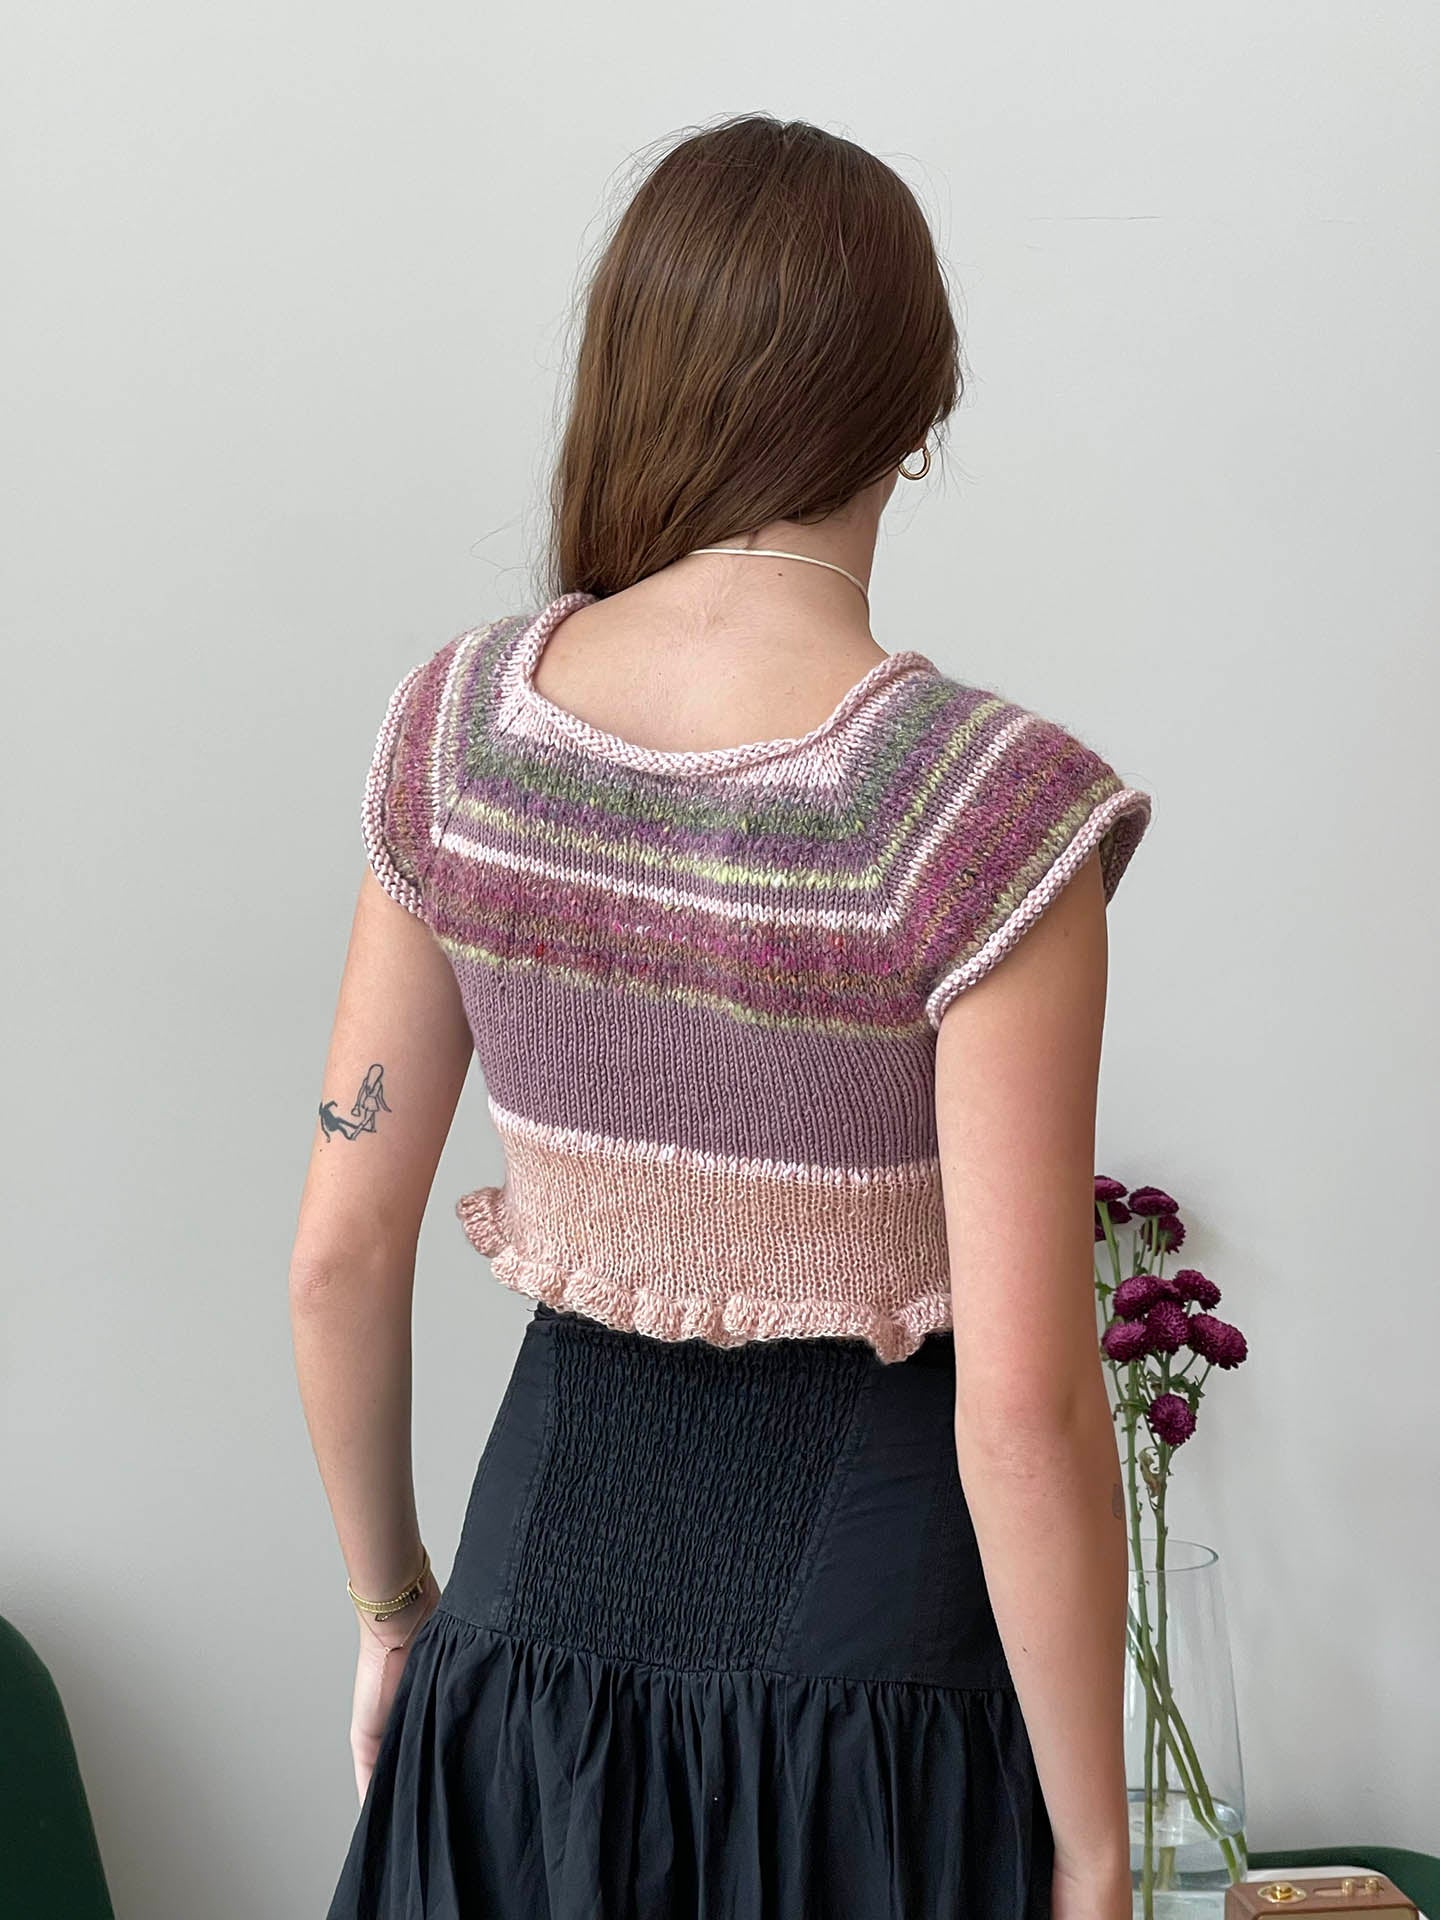 Model turned around showing the back of a cropped knit shirt with hues of pink and purple with a ruffled bottom edge